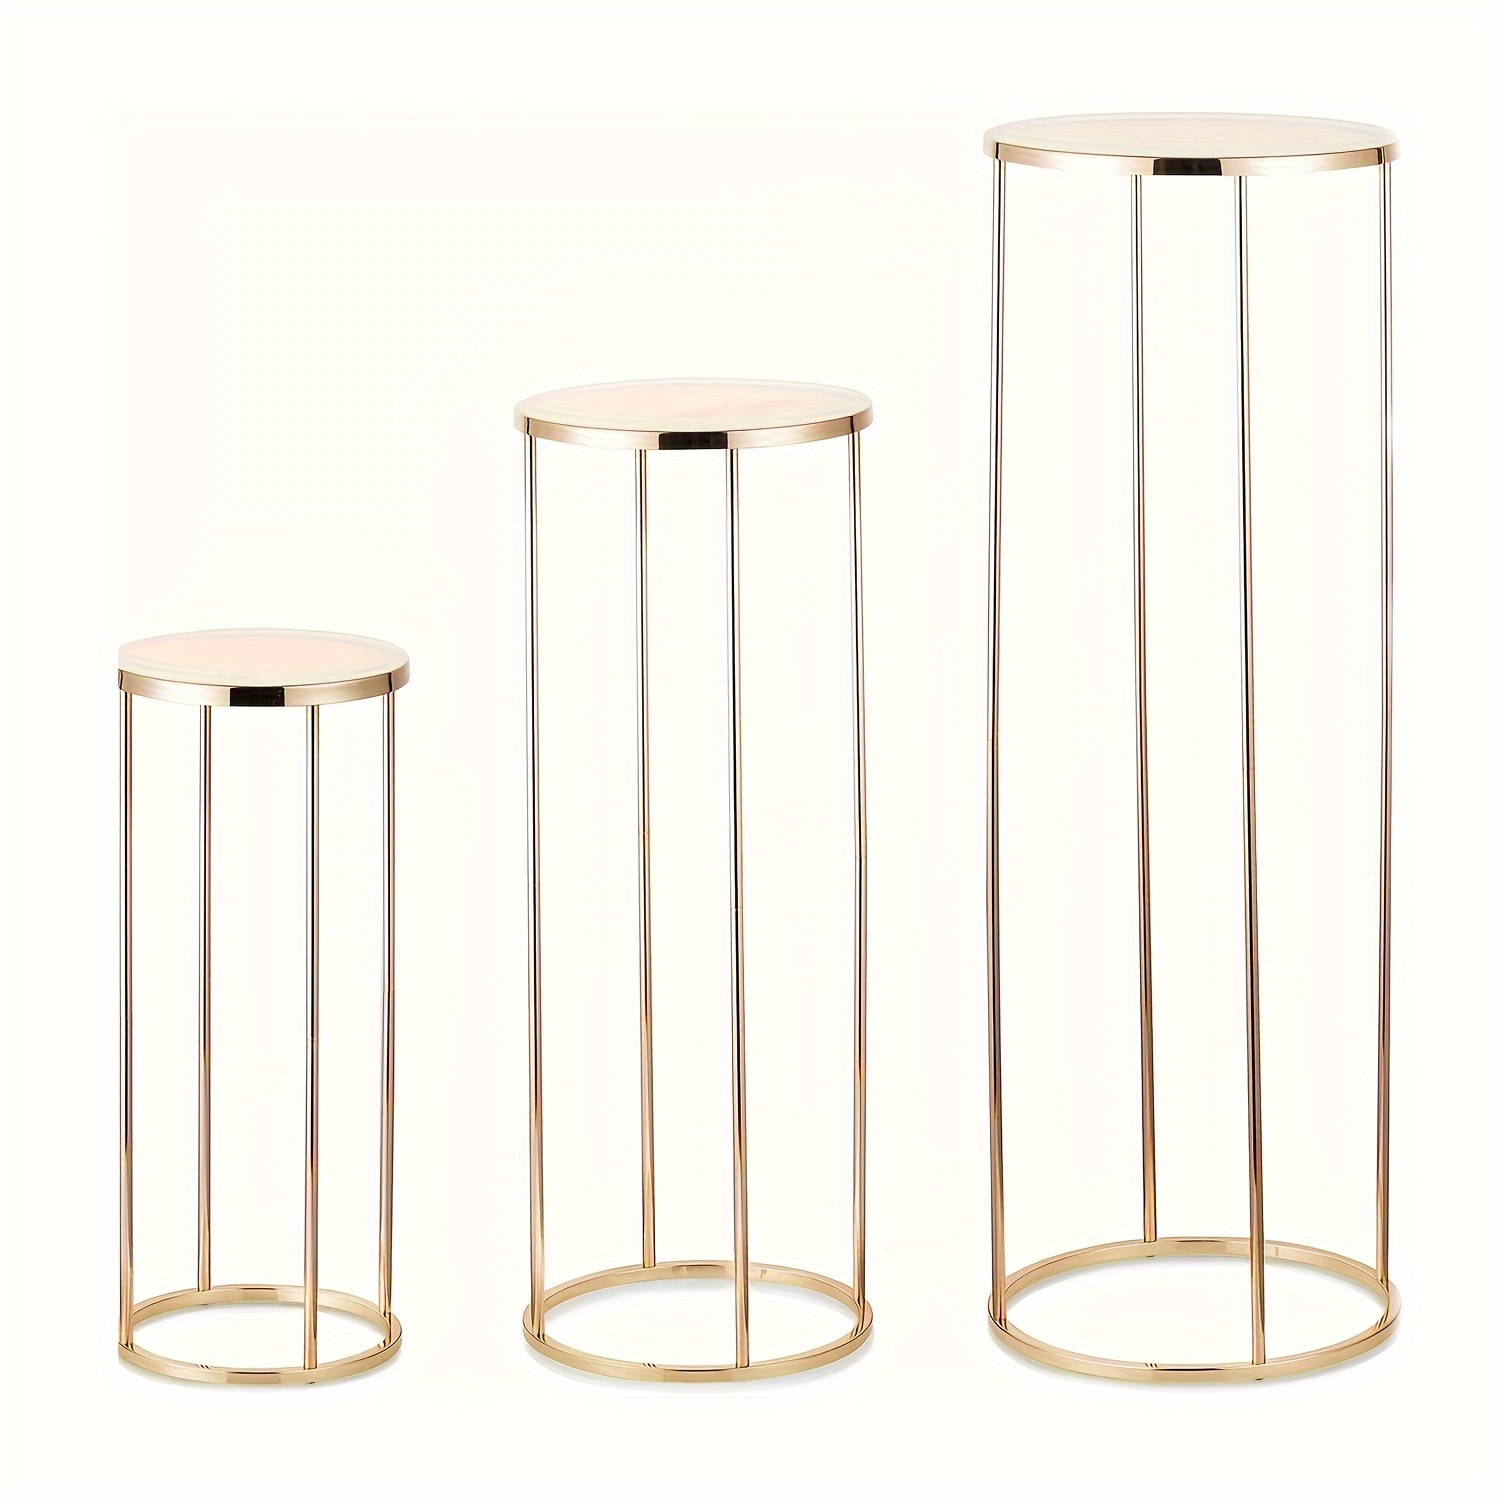 

3pcs Golden Metal Flower Stand For Wedding Table - Floor Vase Stands For Road Leads Tall Column Tabletop Centerpiece For Party Birthday New Opening Home Living Room Decoration